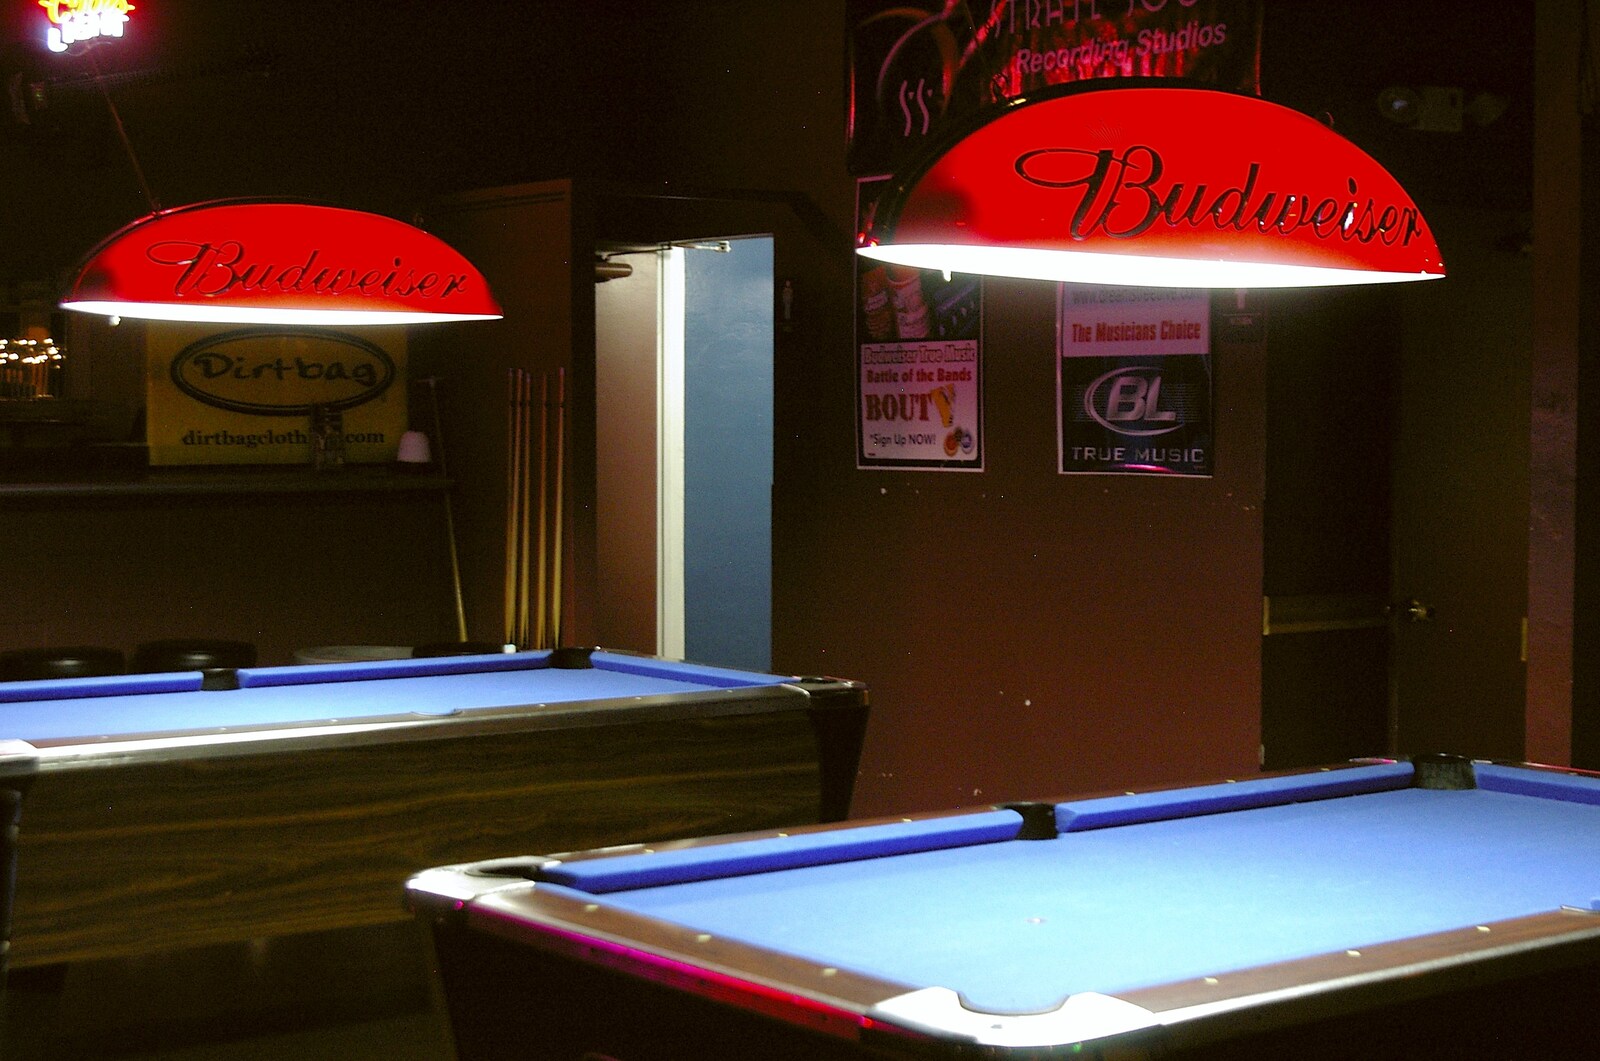 Empty pool tables in Easy Street from Cruisin' Route 101, San Diego to Capistrano, California - 4th March 2006